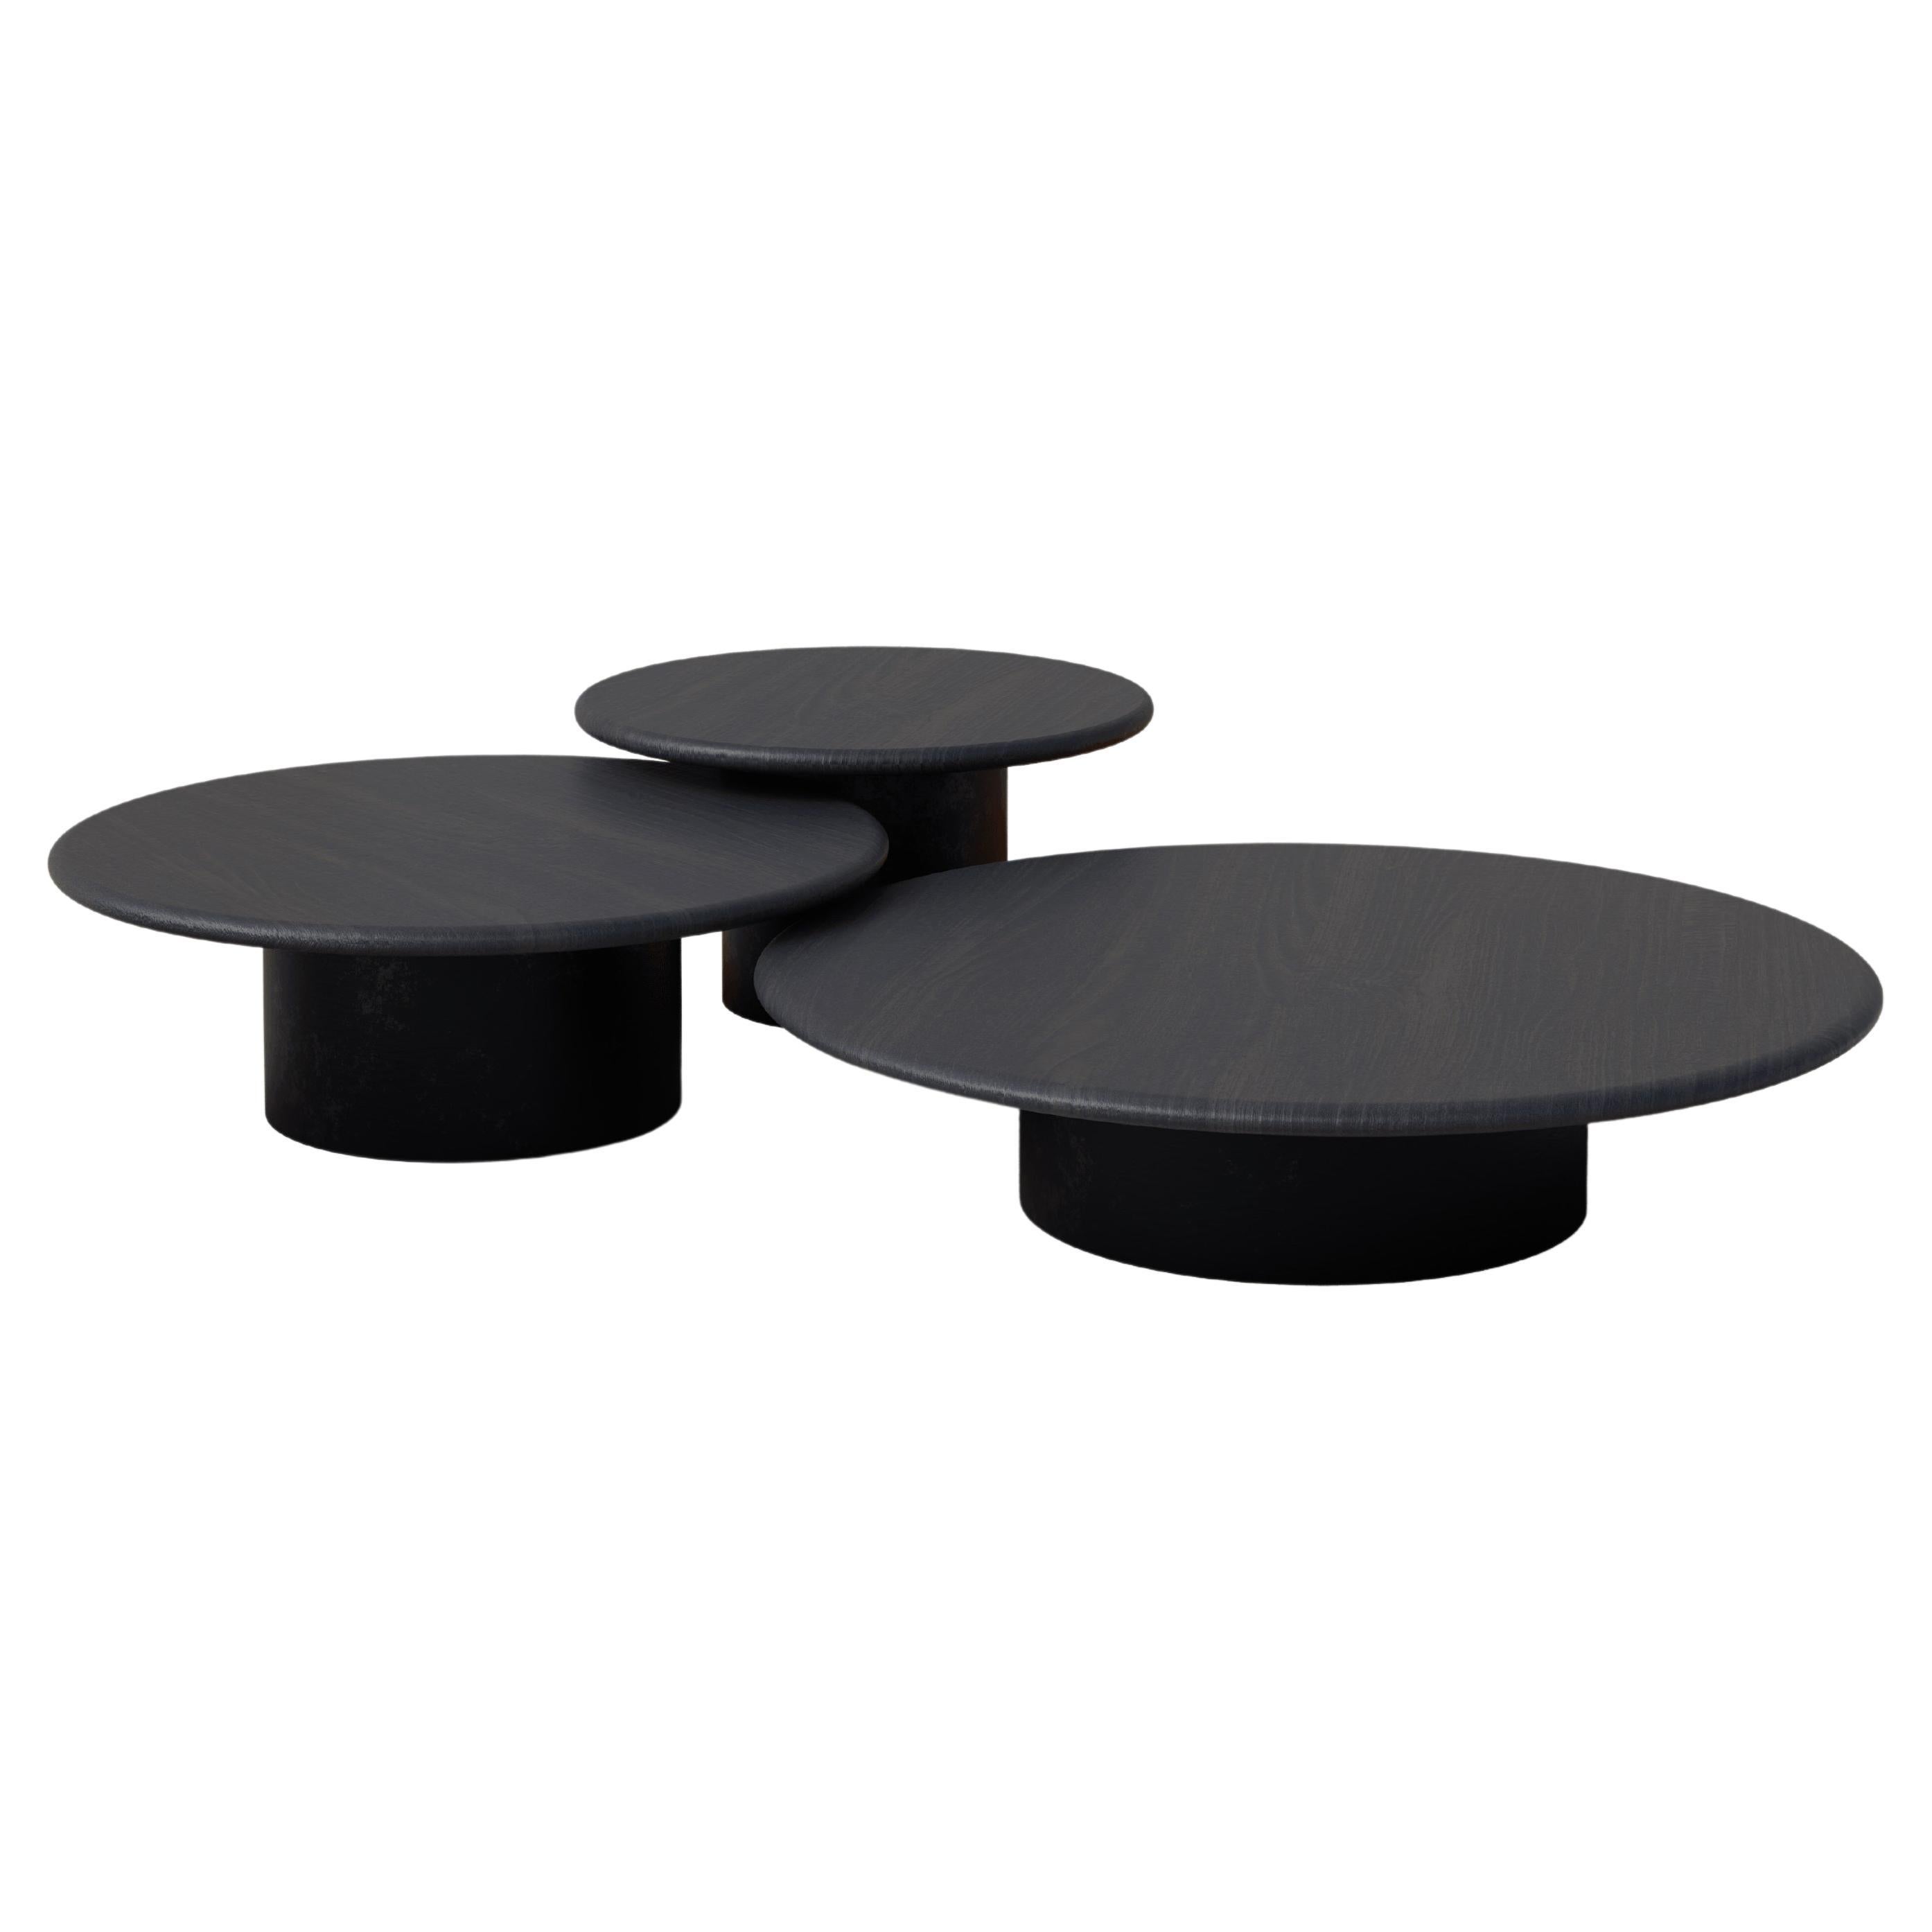 Raindrop Coffee Table Set, 600, 800, 1000, Black Oak / Patinated For Sale